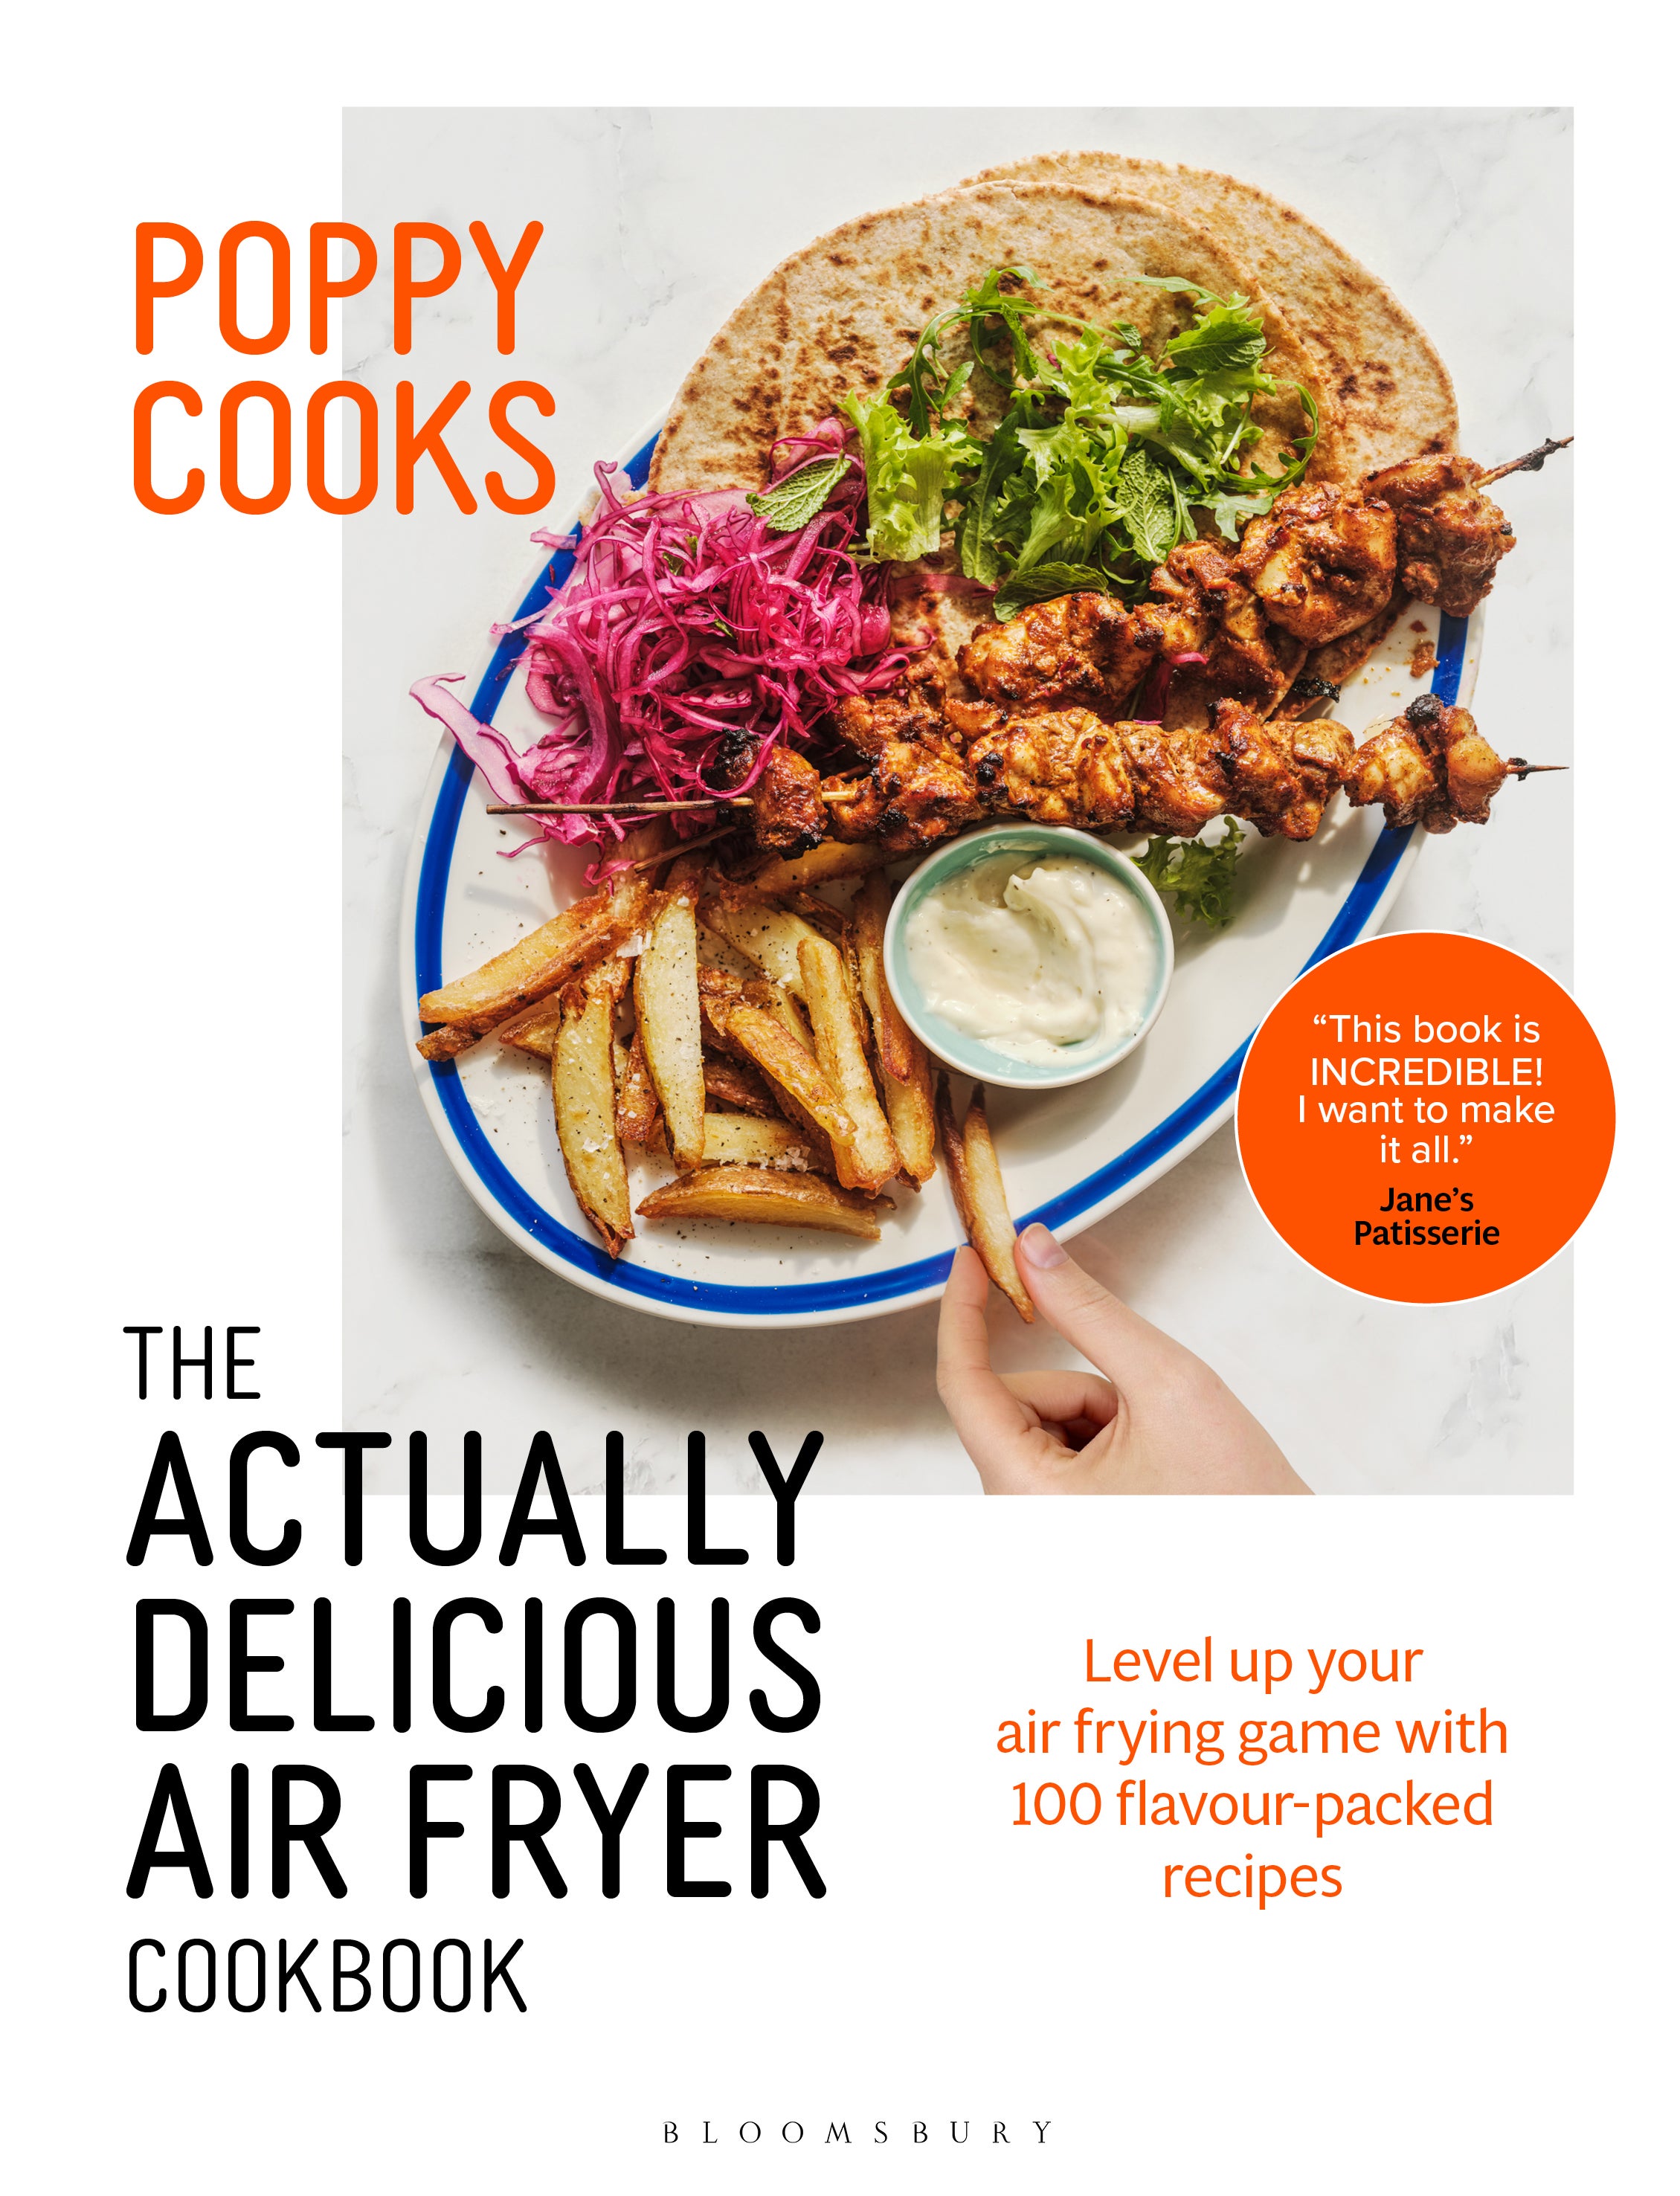 O’Toole’s most recent cookbook is dedicated to air fryer recipes